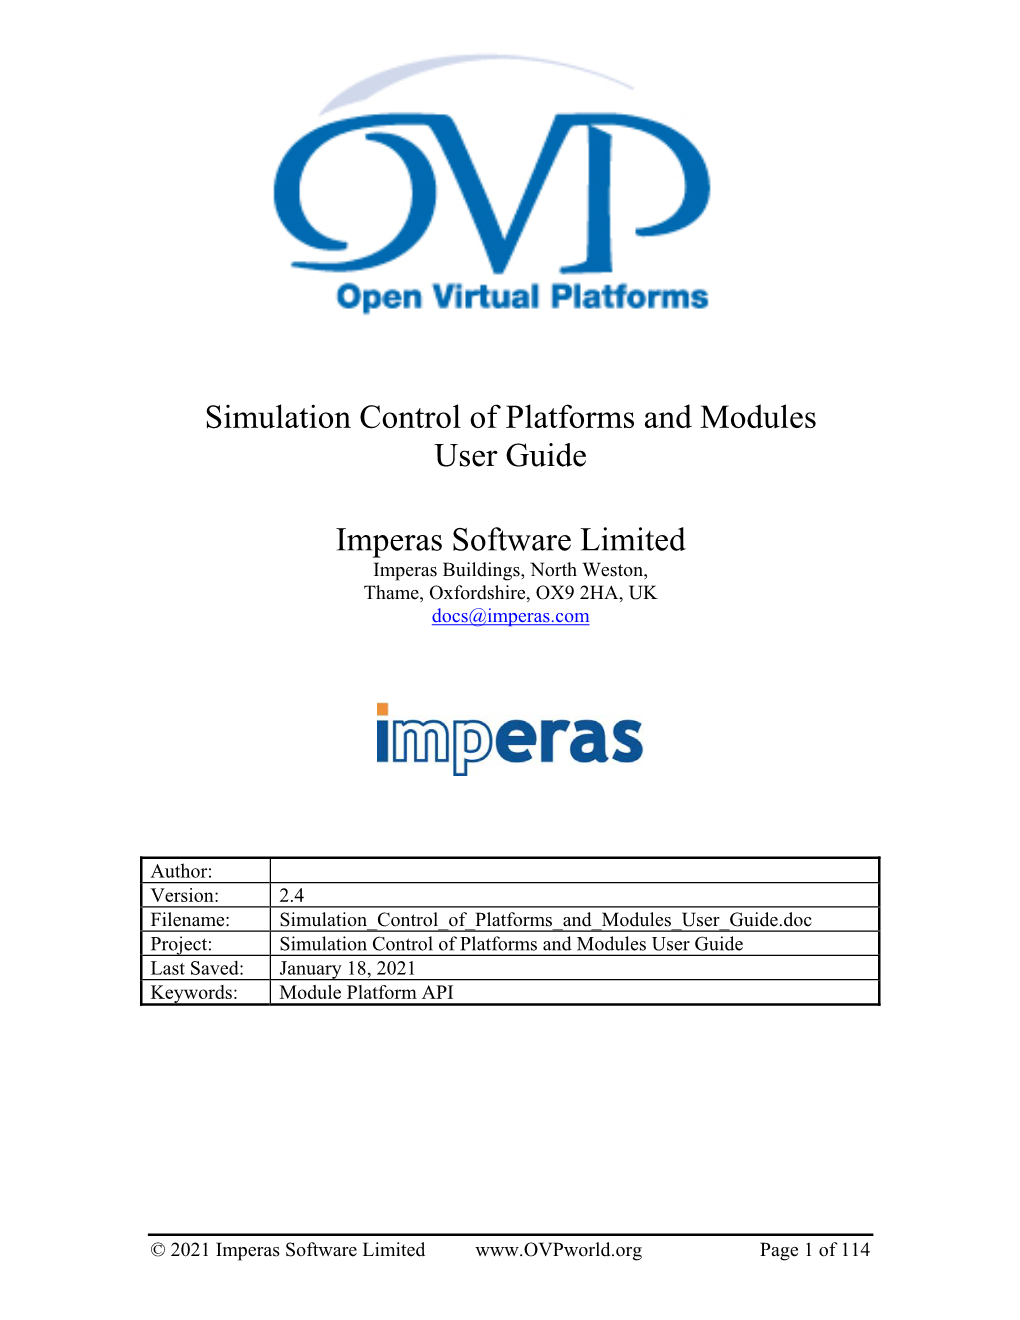 Simulation Control of Platforms and Modules User Guide